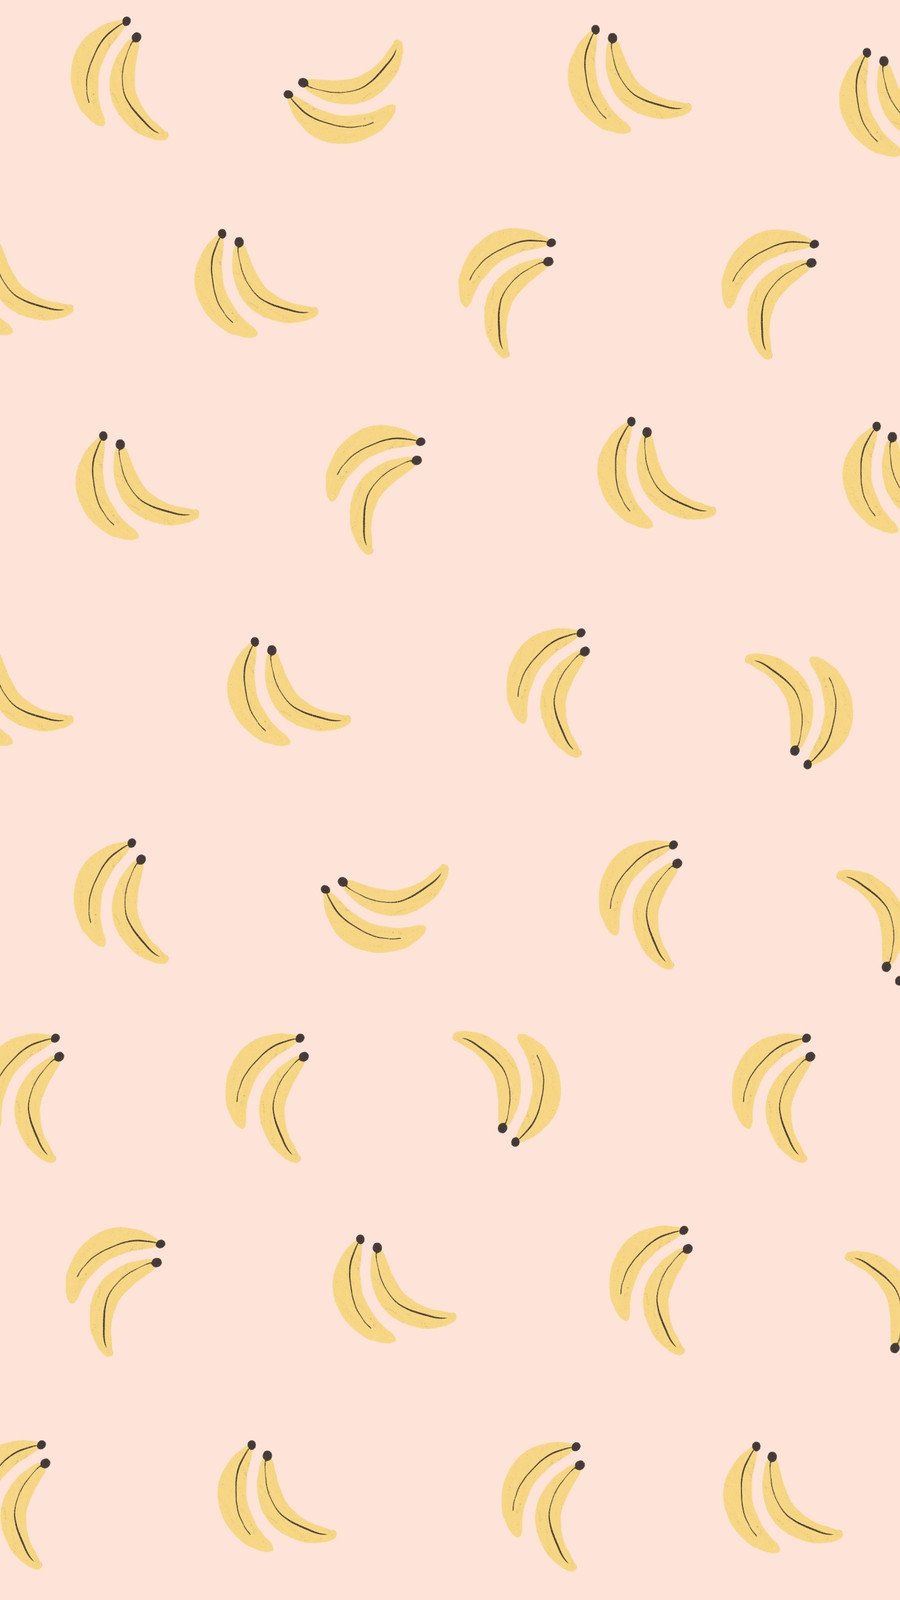 Cute Watercolor Banana Fruit Background Wallpaper Image For Free Download   Pngtree